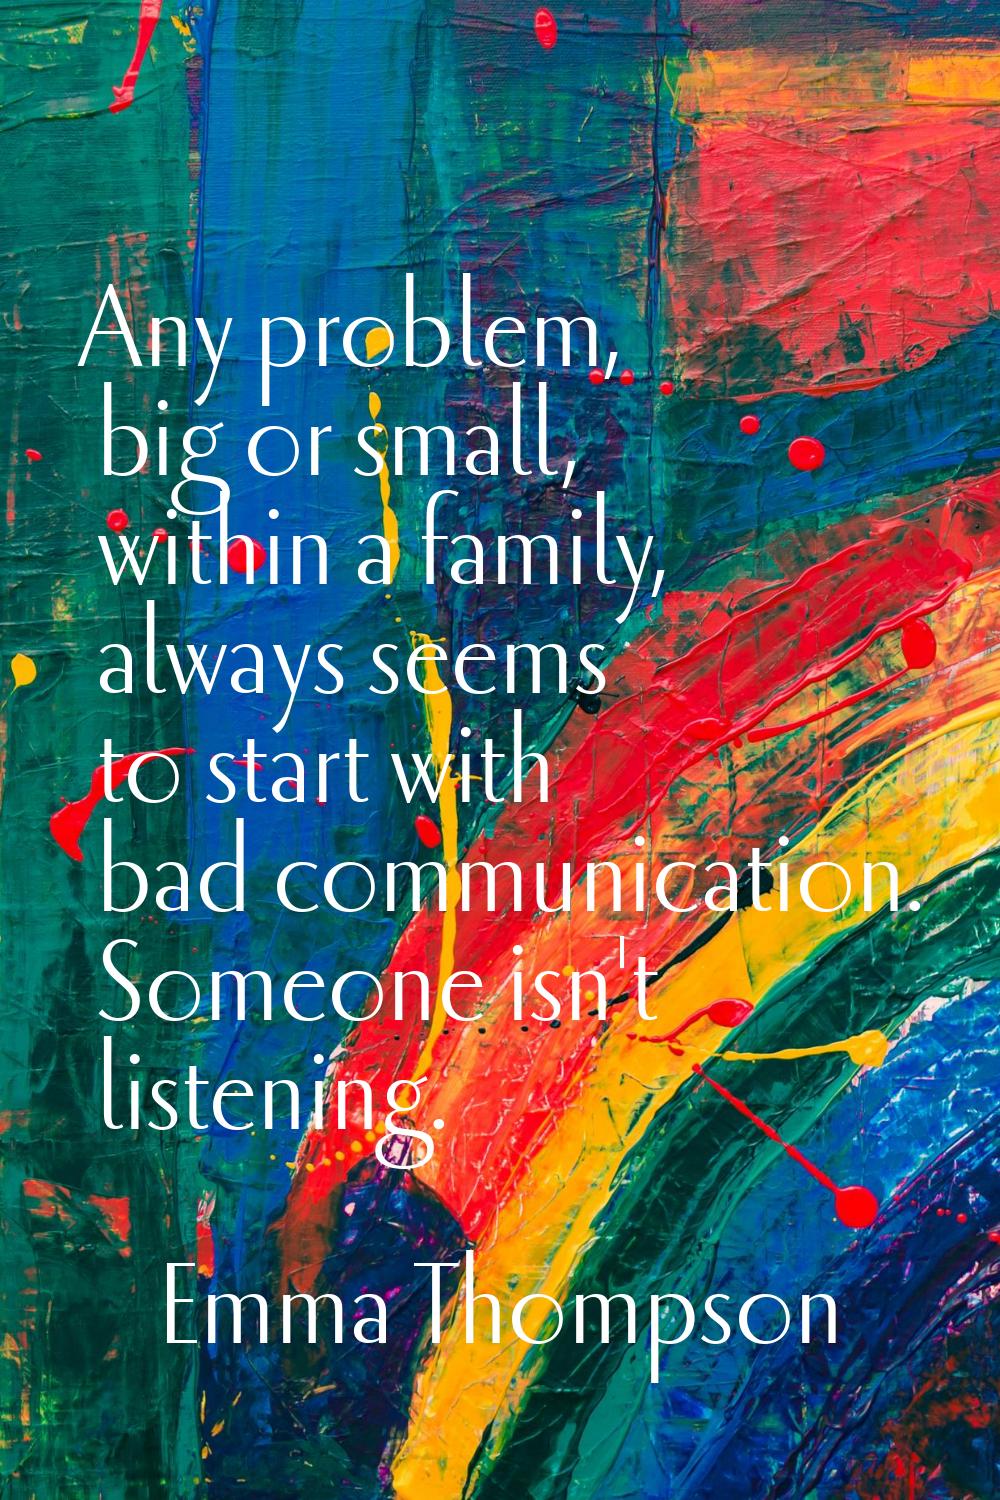 Any problem, big or small, within a family, always seems to start with bad communication. Someone i